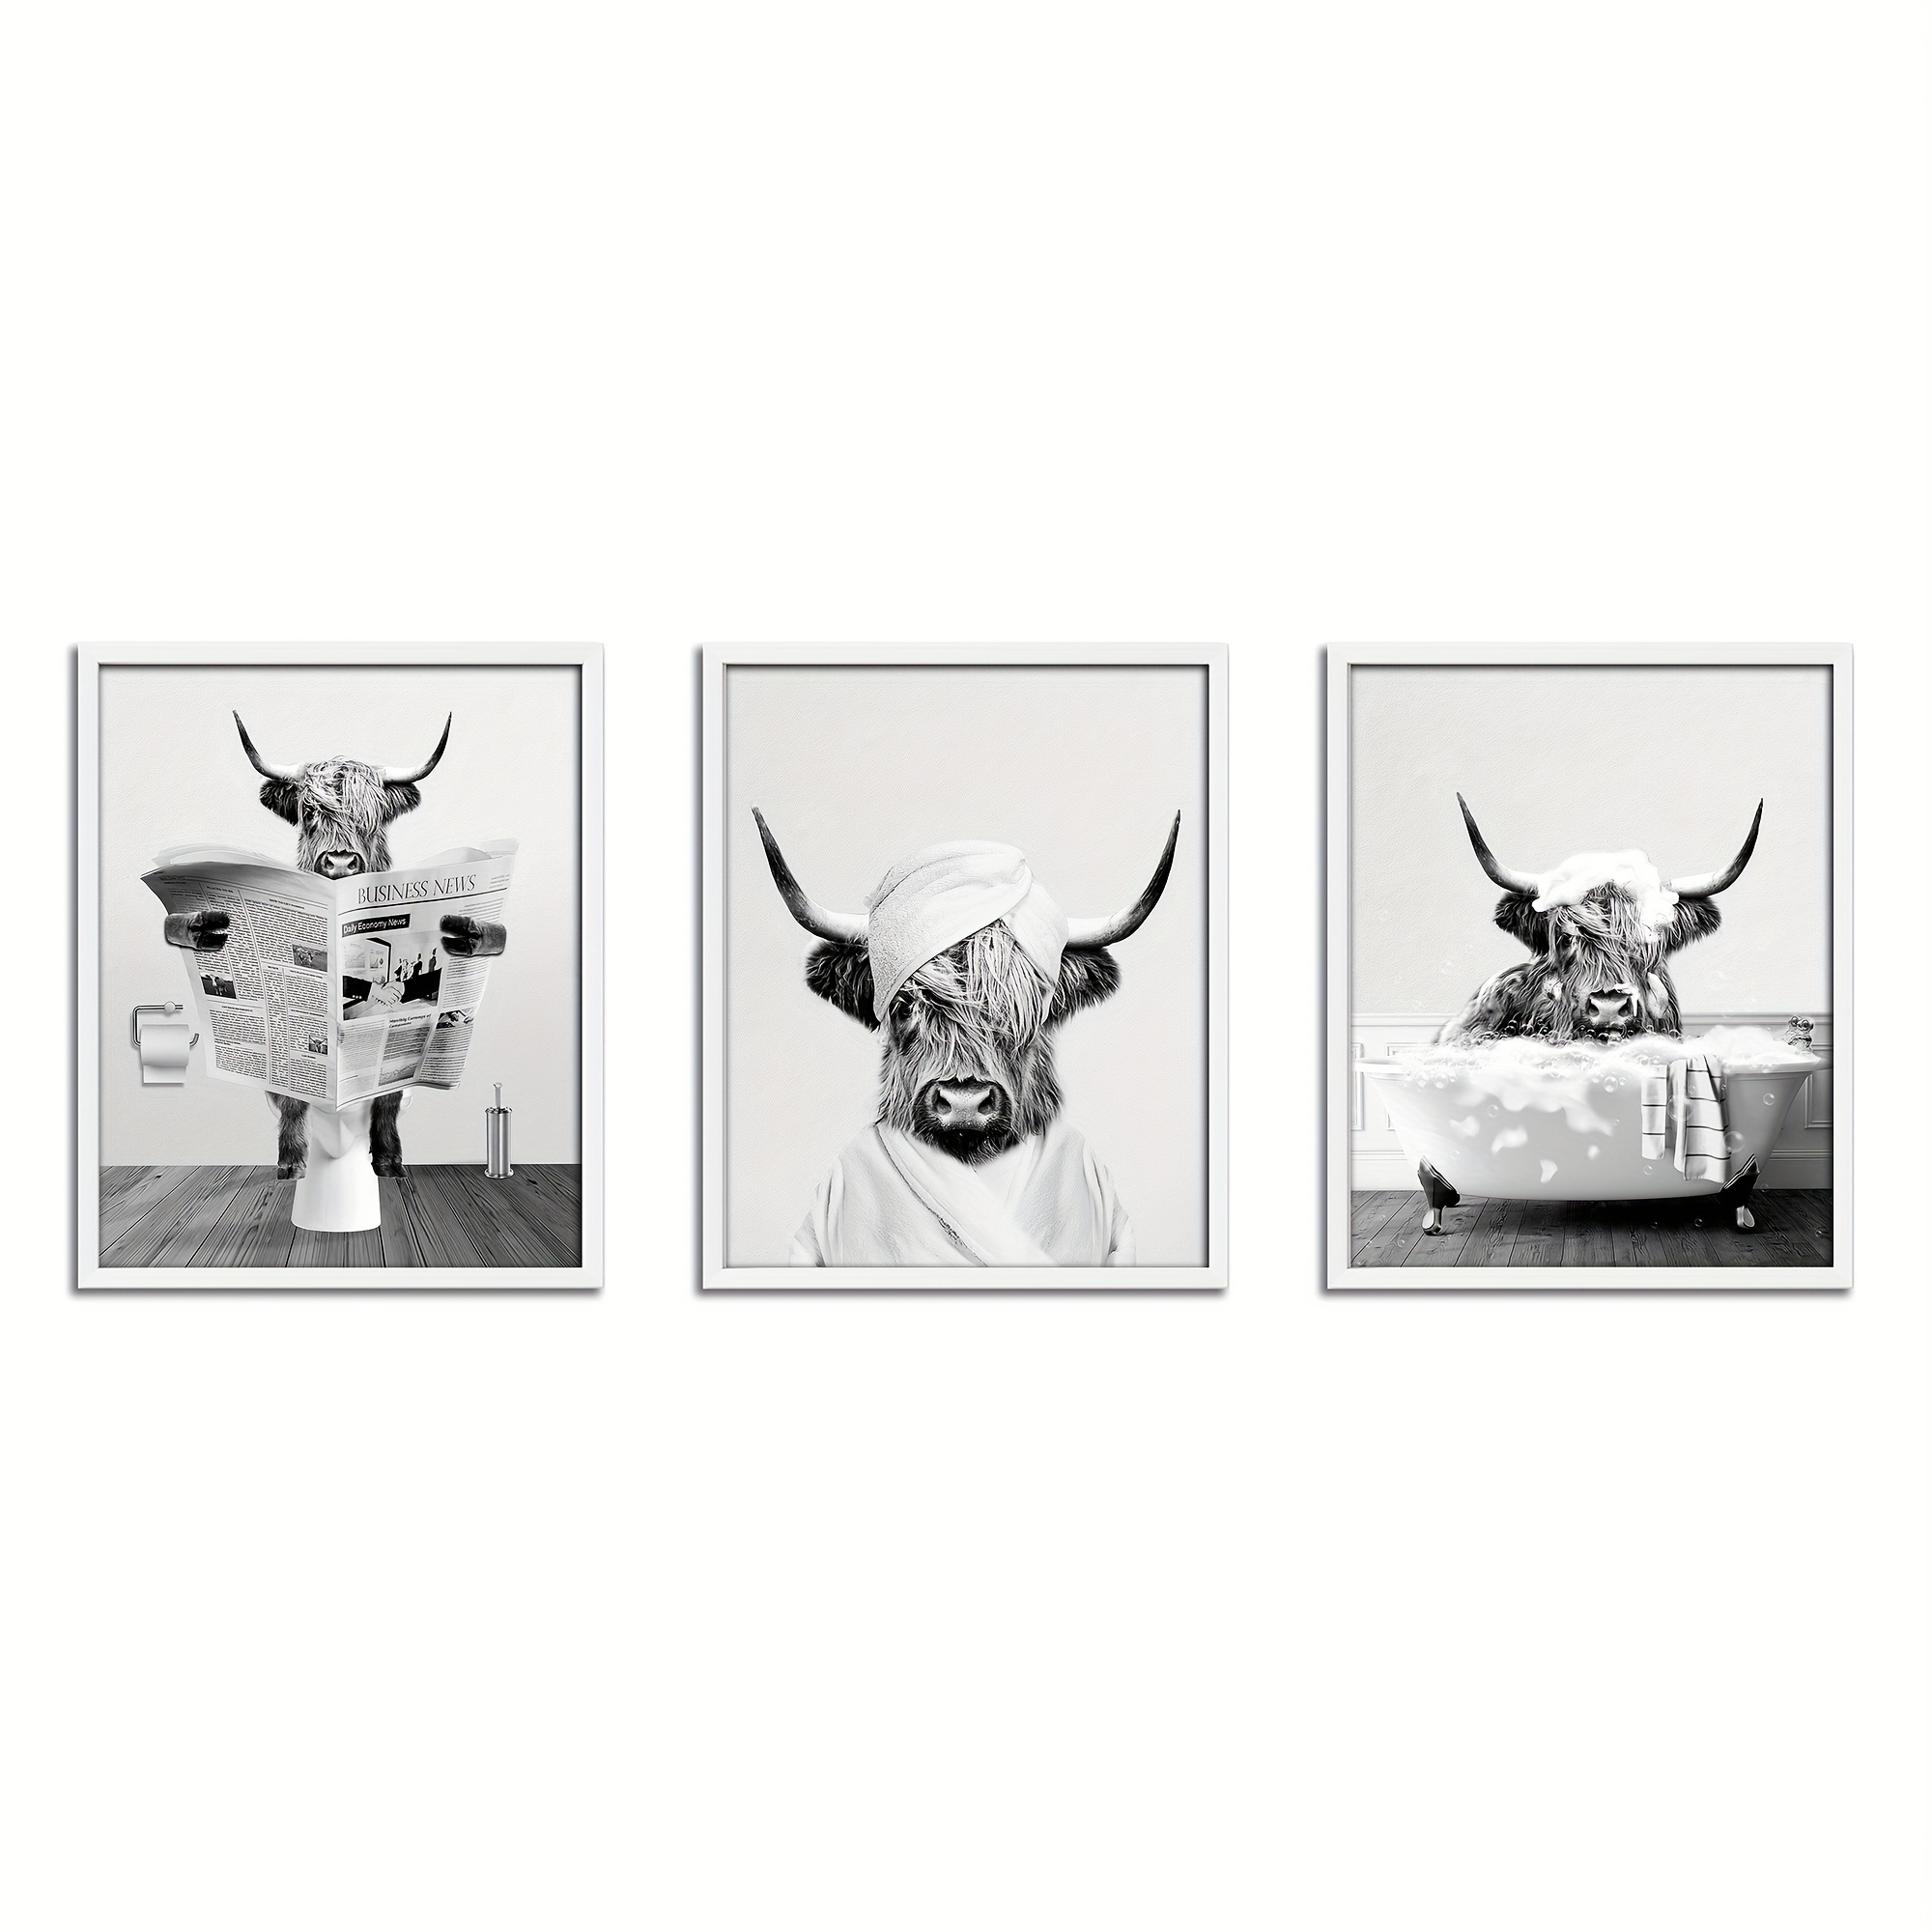 

3pcs/set Rustic Farmhouse Style Highland Cow Wall Art For Living Room, Bedroom, And Kids Bathroom - Black And White Canvas Print, Humorous Animal Bathroom Artwork, 12x16 Inches, No Frame